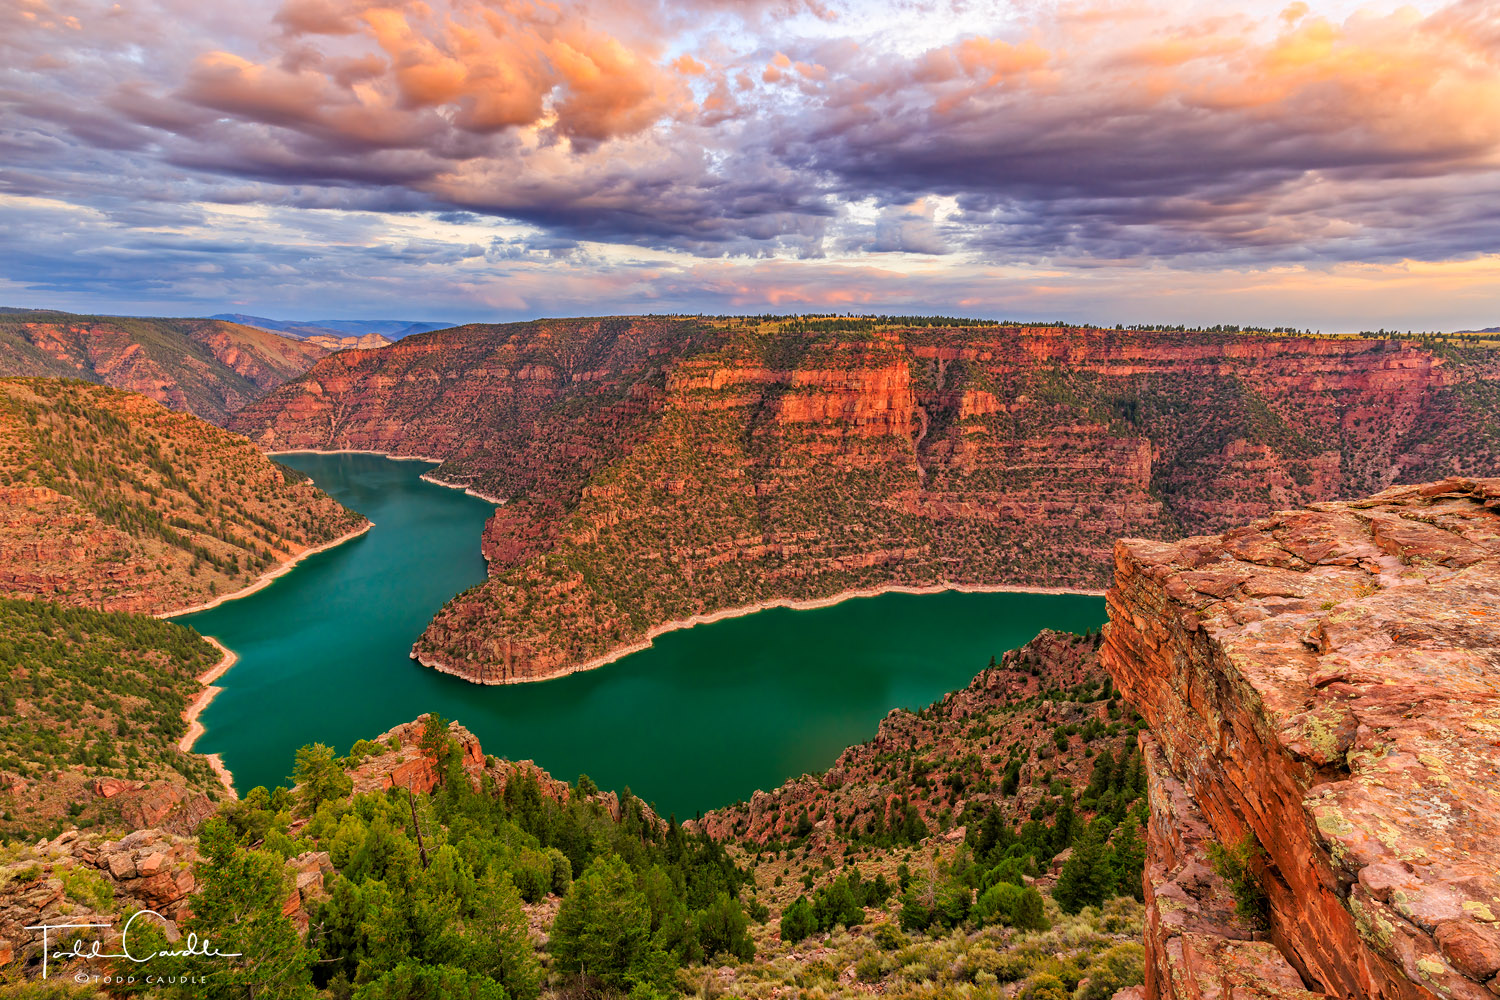 Flaming Gorge, named by 19th-Century explorer John Wesley Powell, comes by its name honestly, owing to the dramatic red rock...